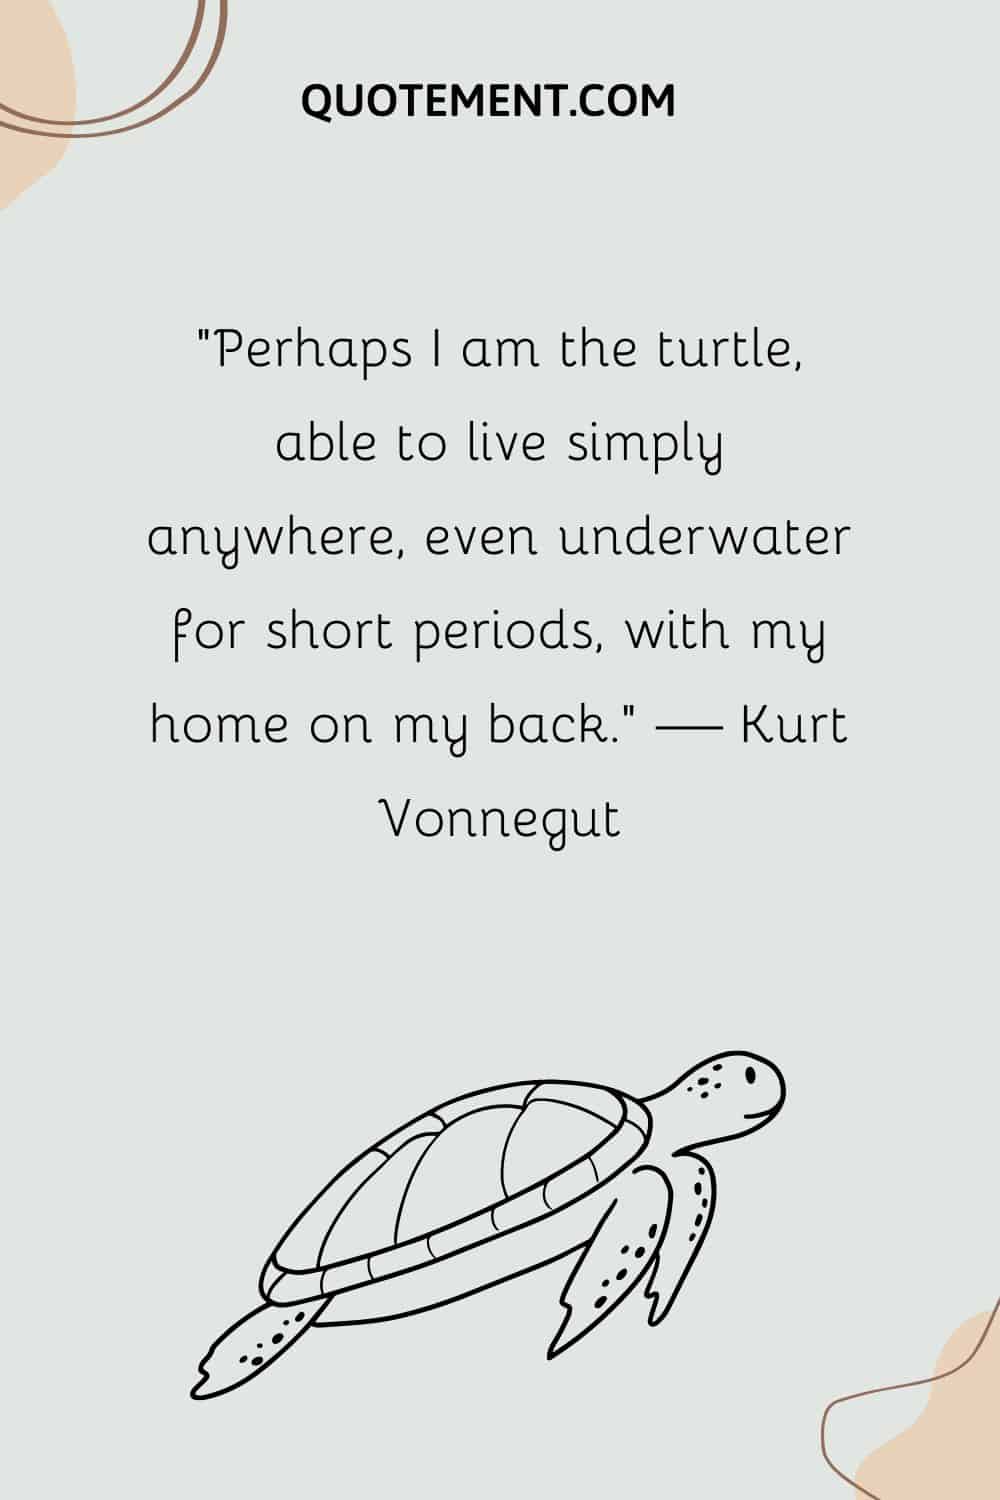 Perhaps I am the turtle, able to live simply anywhere